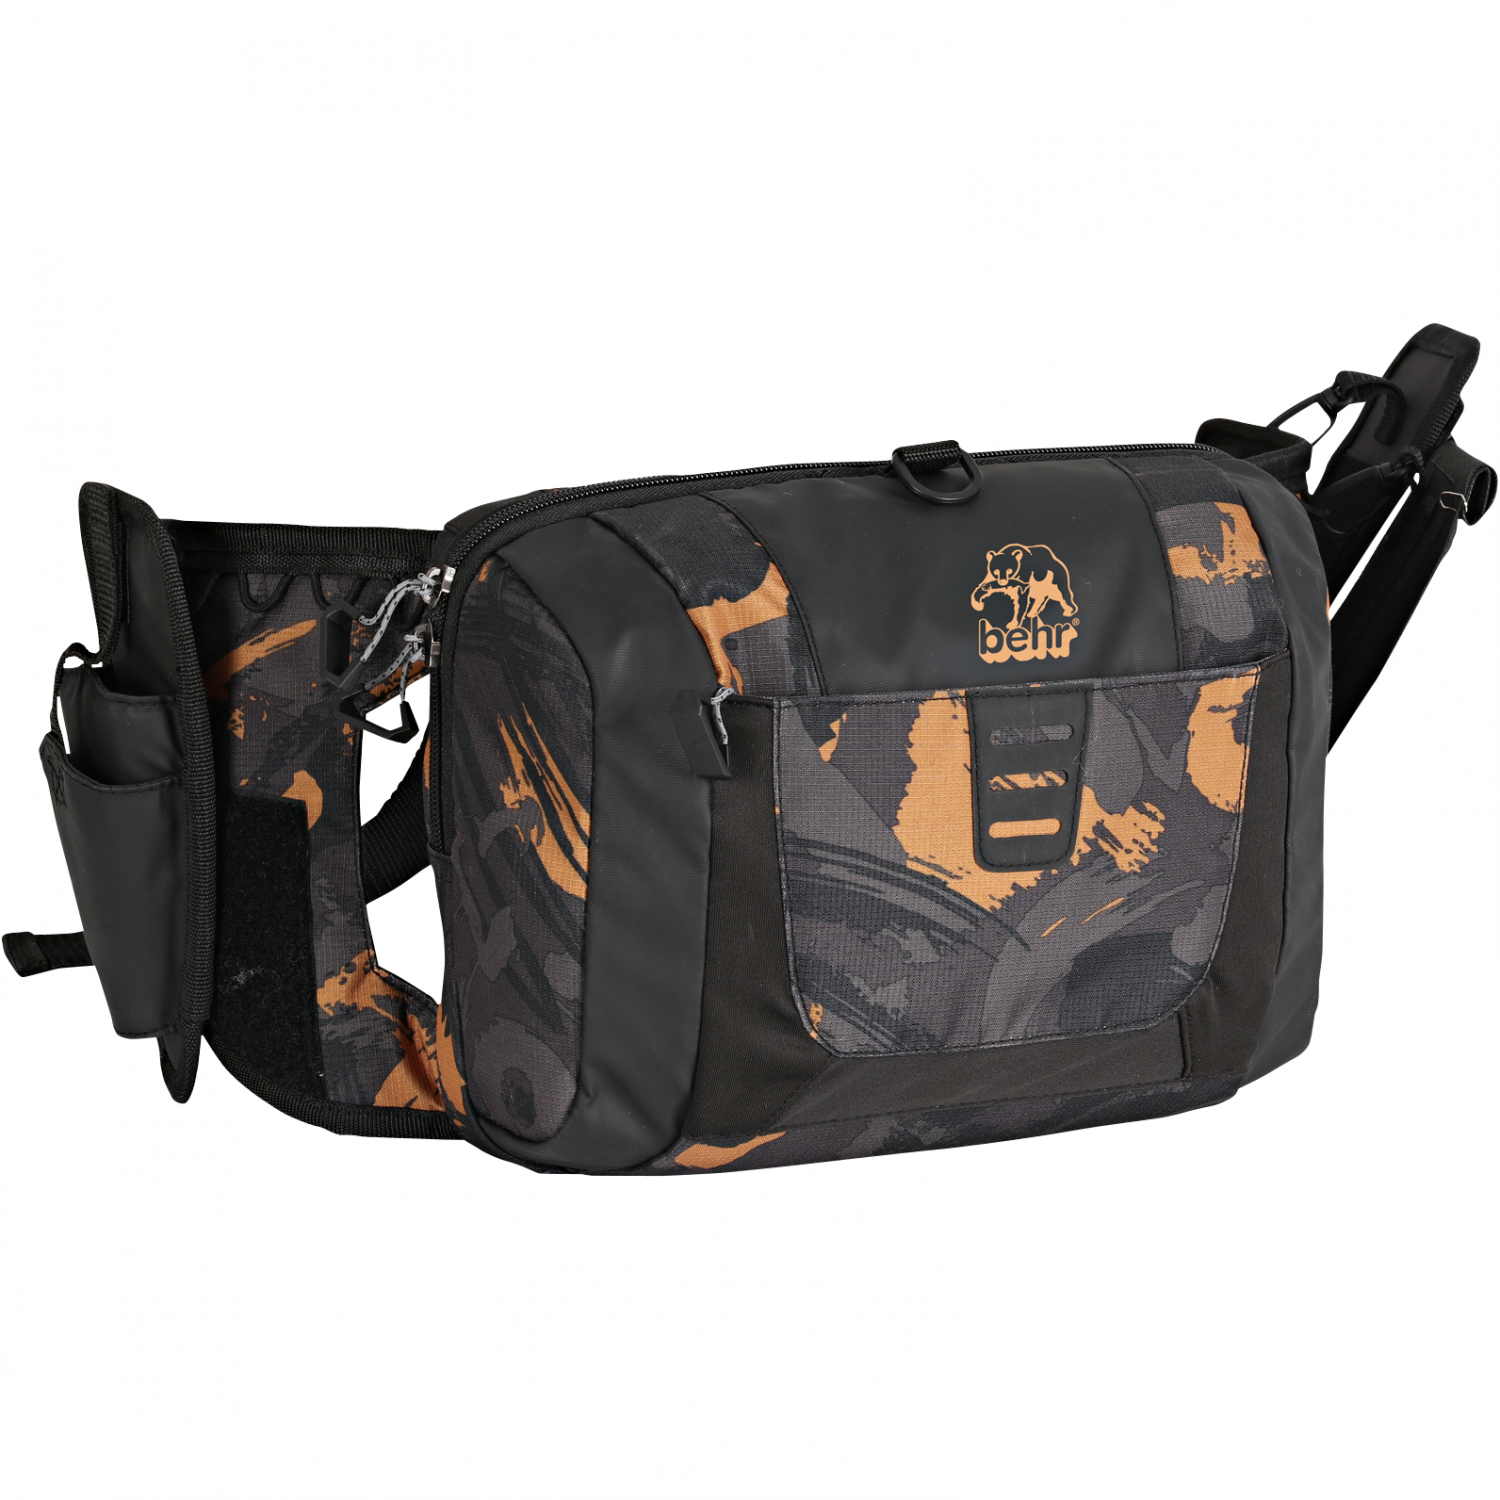 Behr Spinning and fly fishing bag at low prices